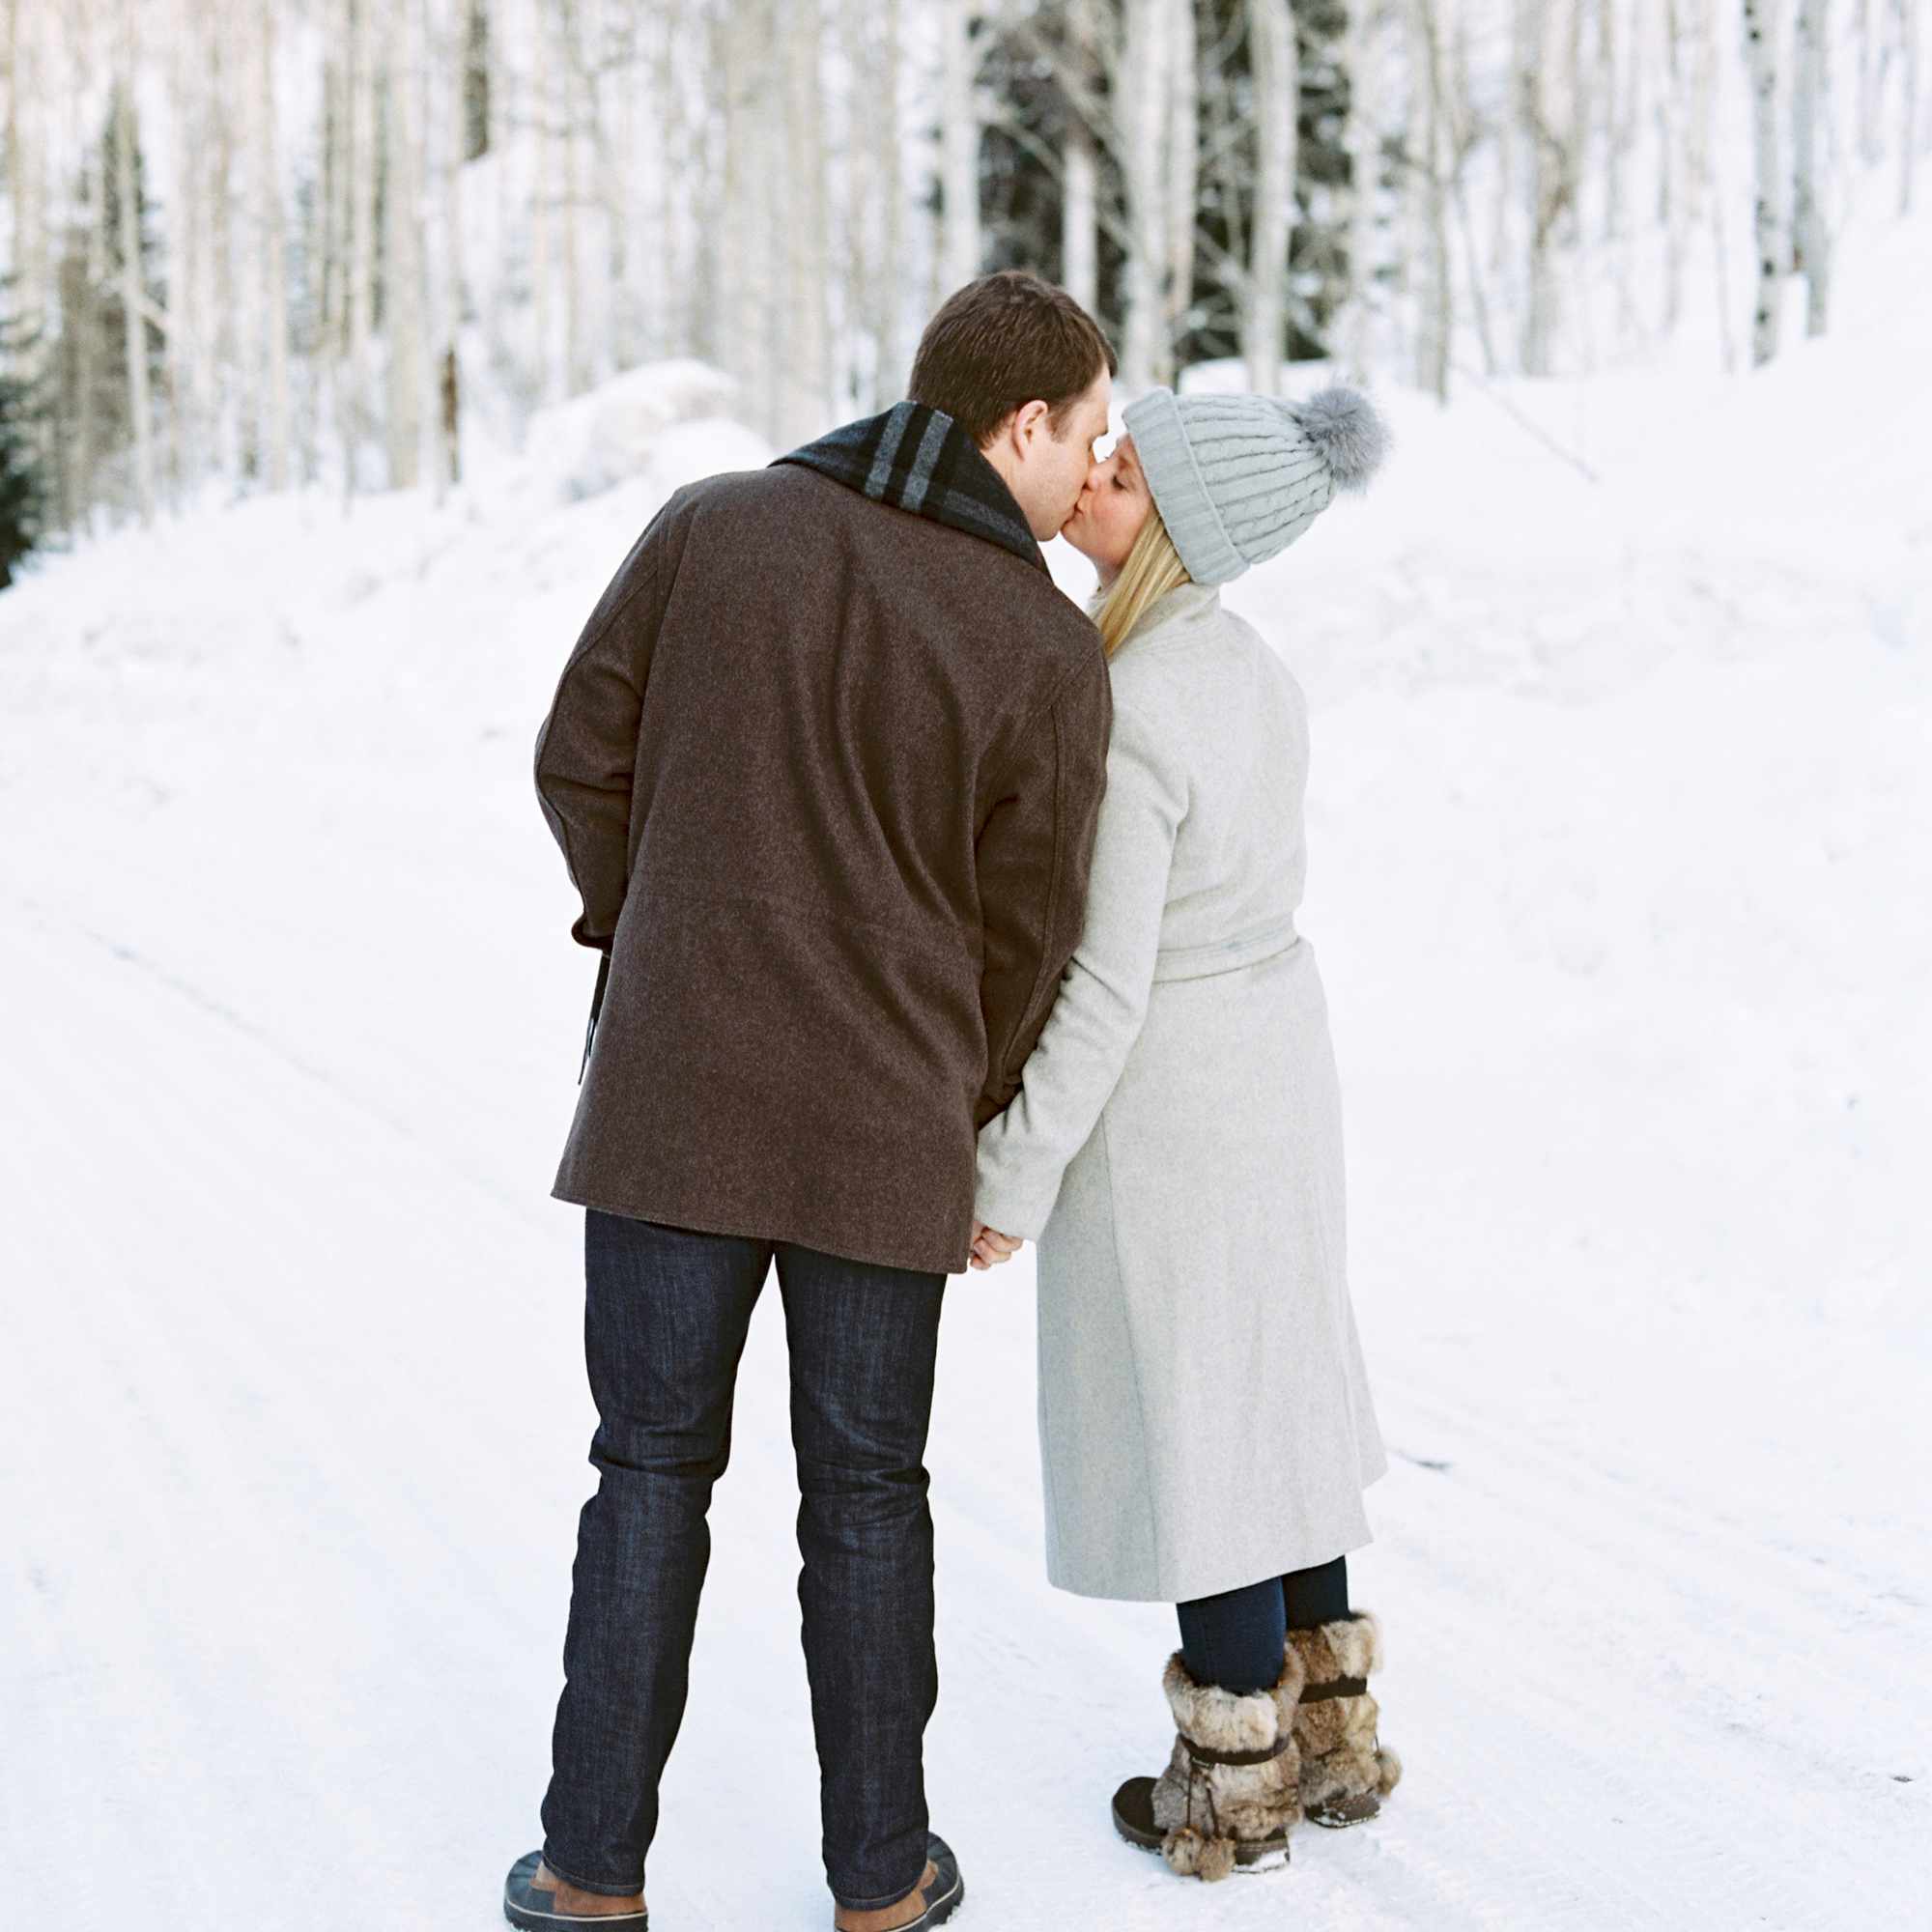 Engagement Photo Ideas to Steal From Couples Who Totally Nailed It